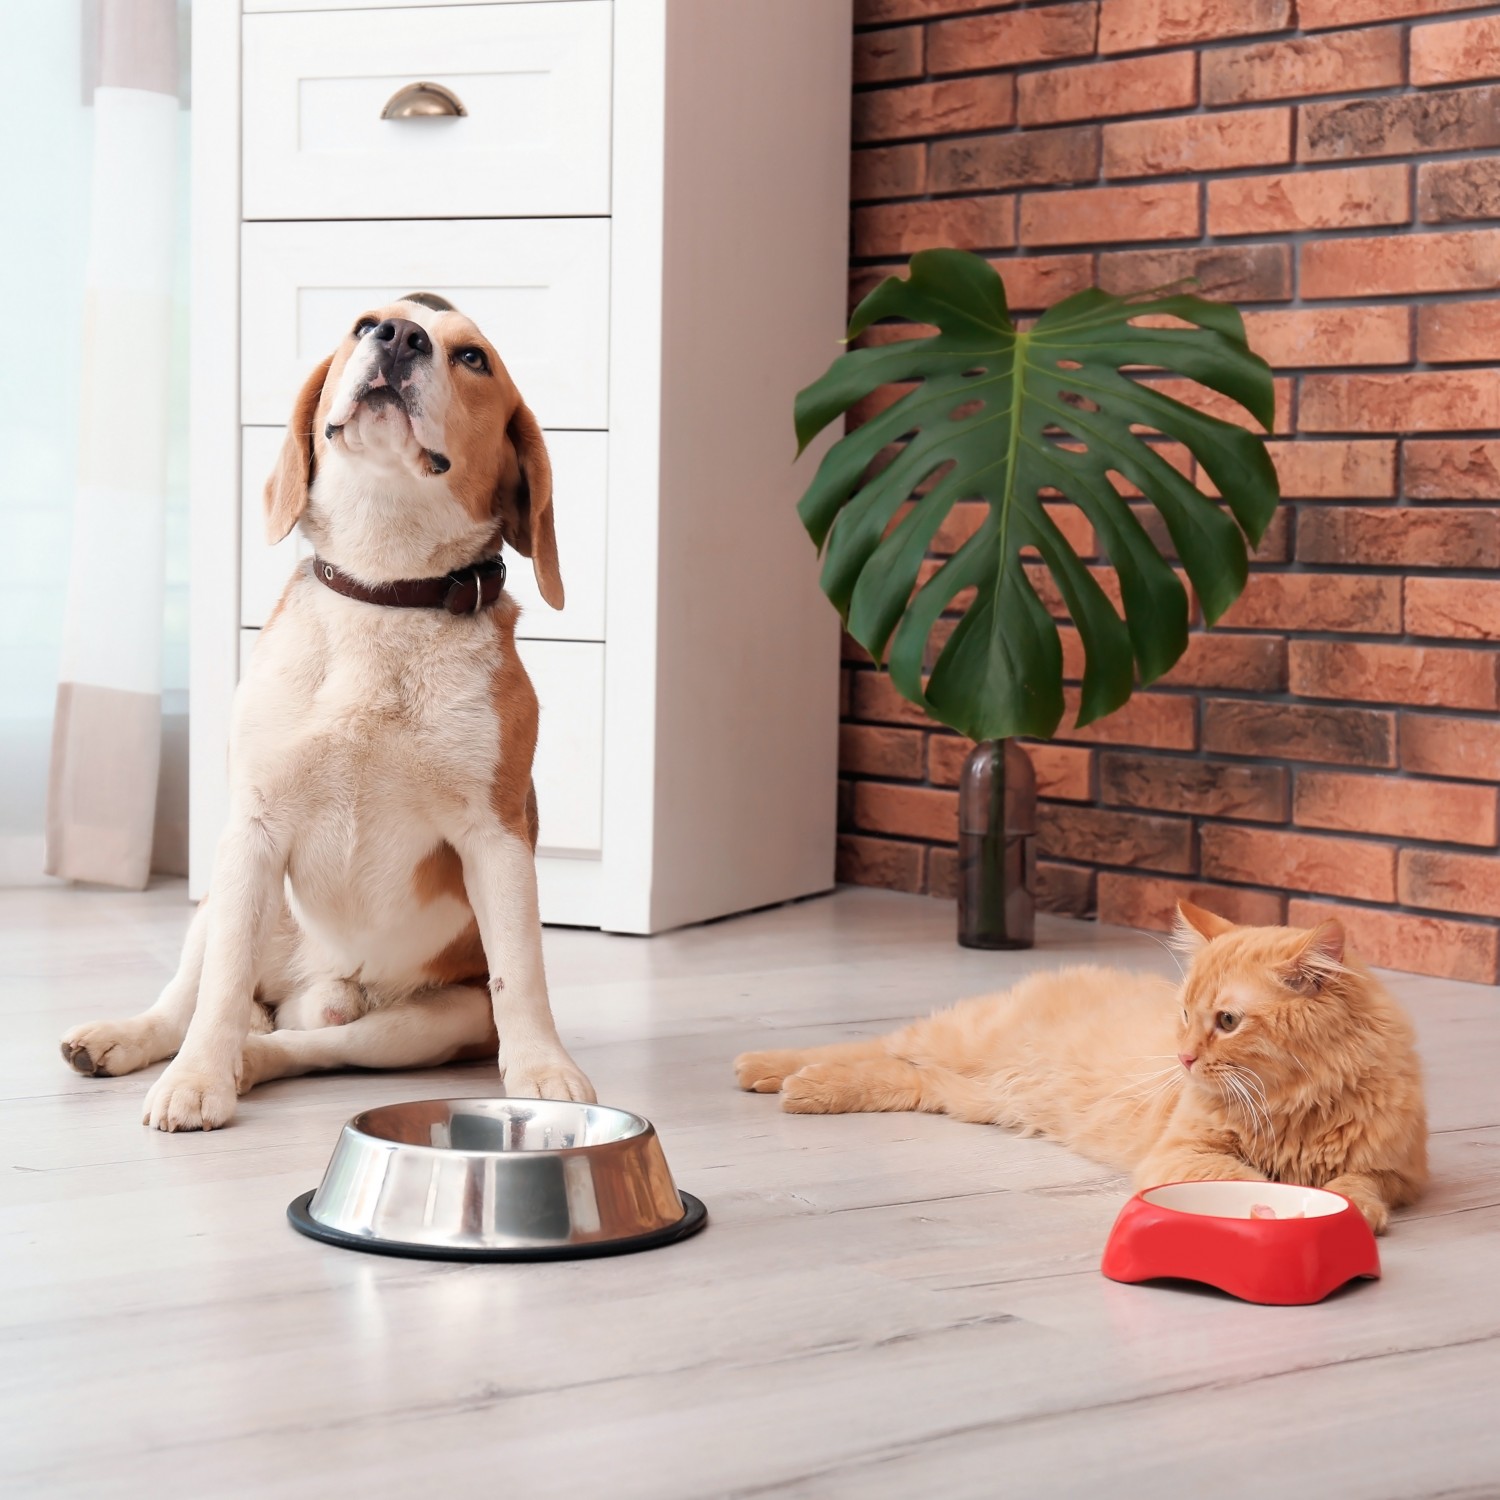 dog and cat with food